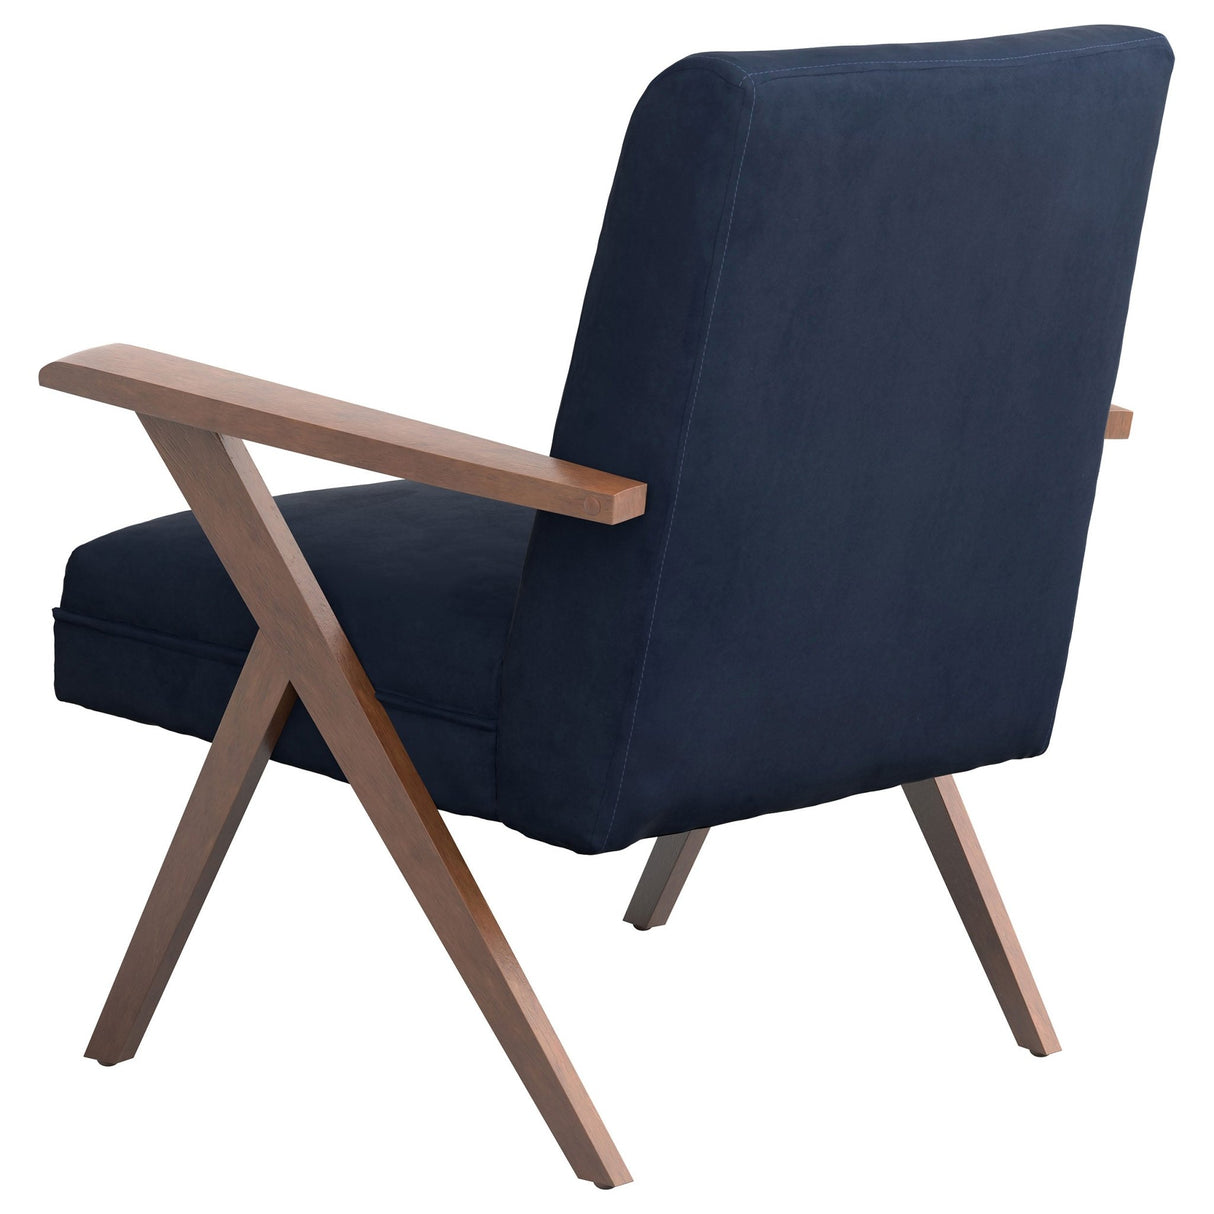 Accent Chair - Cheryl Wooden Arms Accent Chair Dark Blue and Walnut - Accent Chairs - 905415 - image - 6